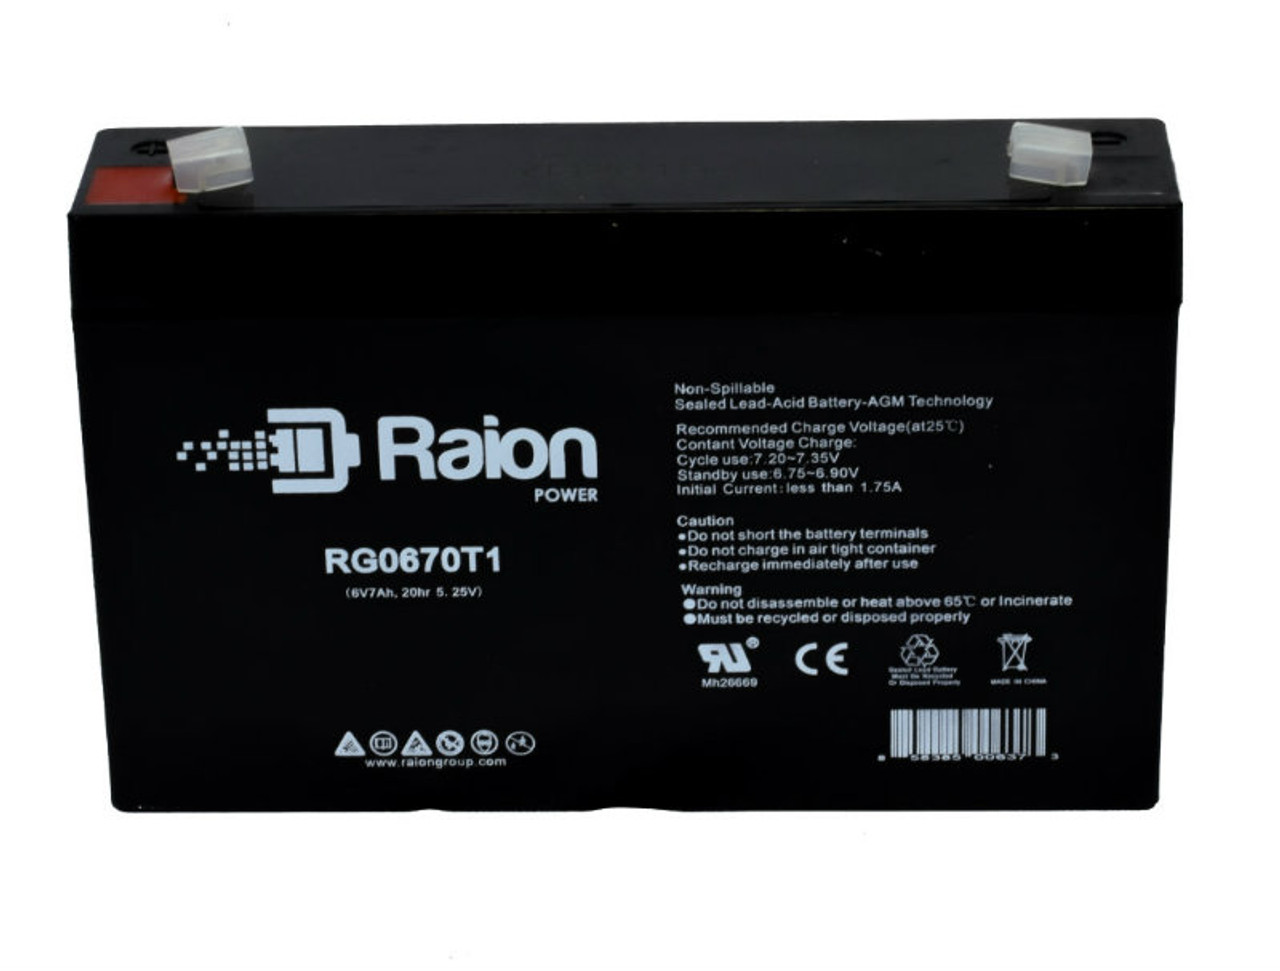 Raion Power RG0670T1 Replacement Battery Cartridge for Pace Tech MiniPack 911 Monitor